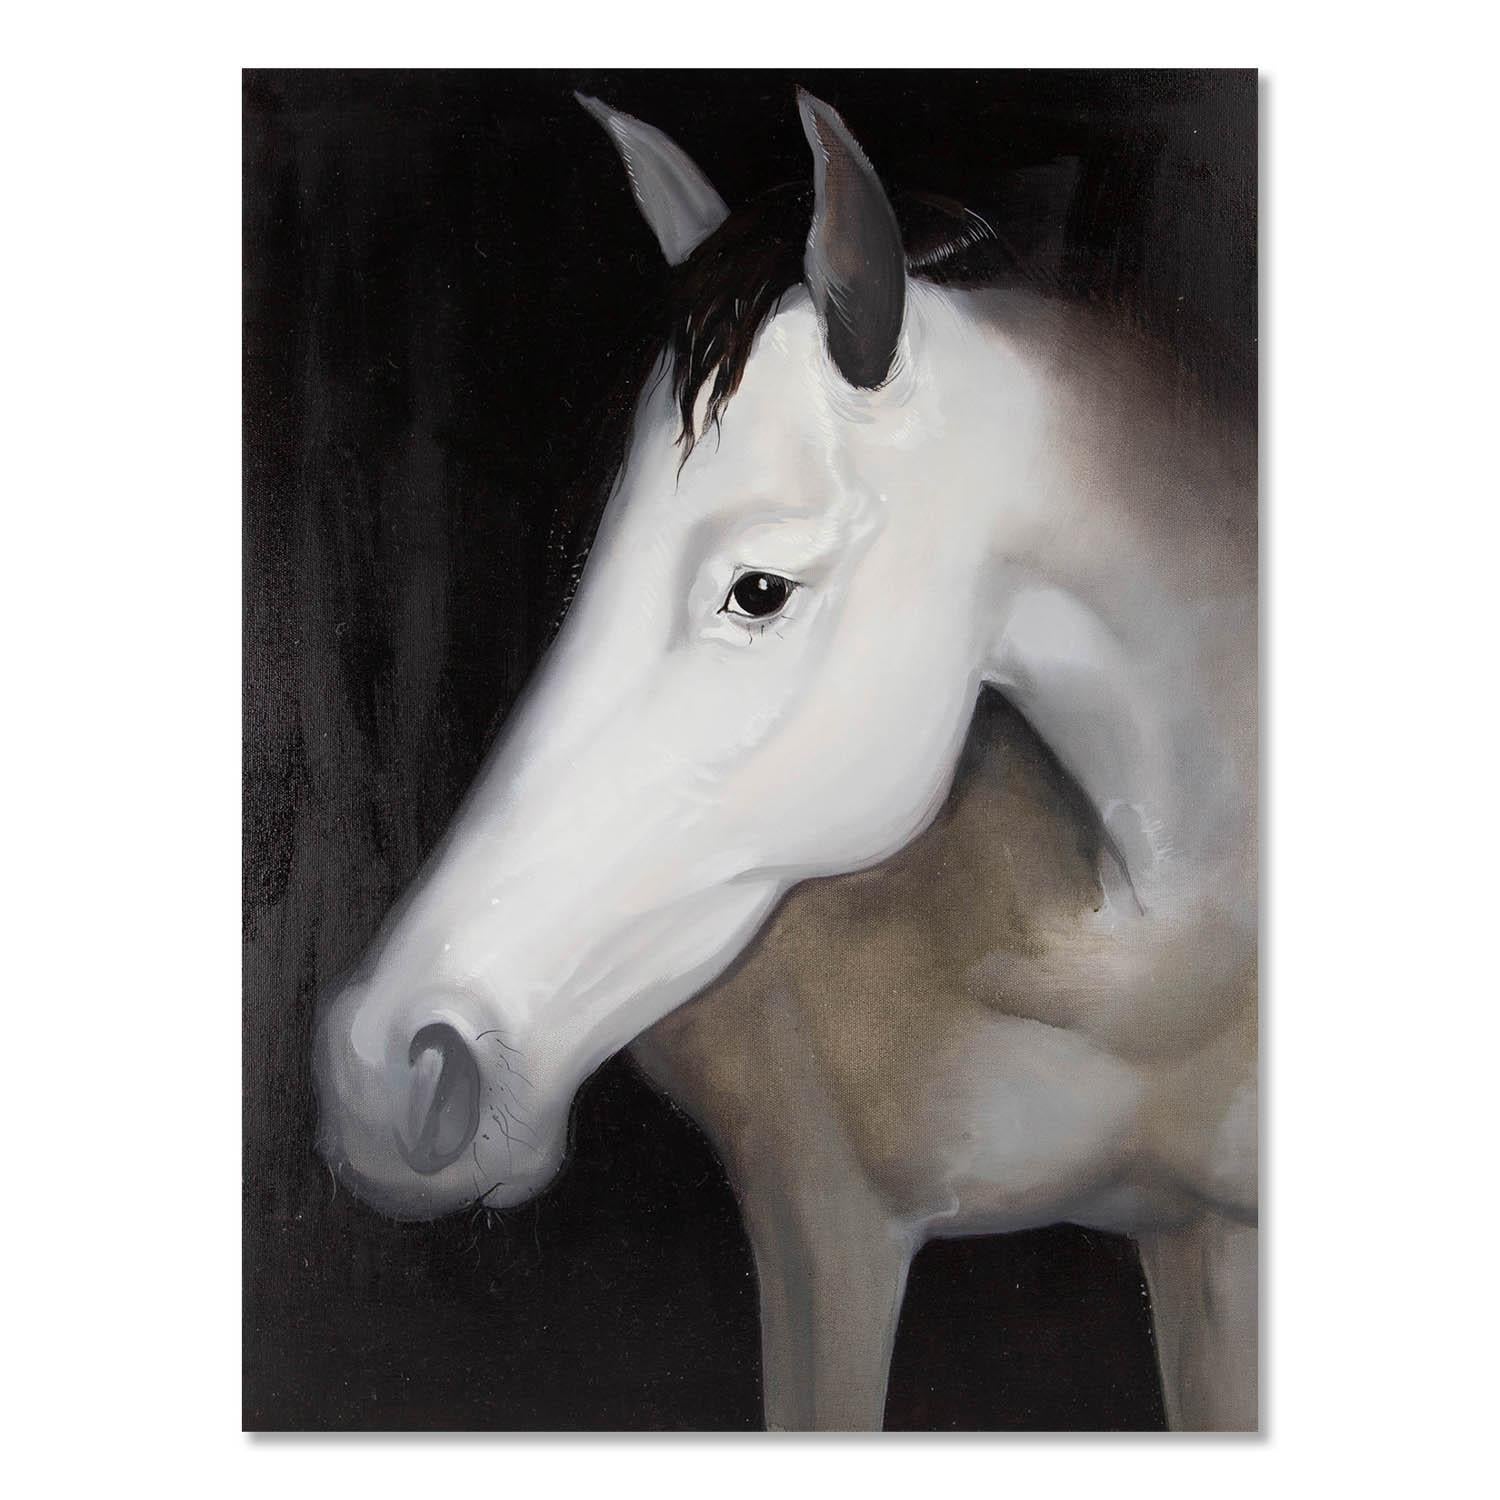  Title: Horse Series 8
 Medium: Oil on canvas
 Size: 31 x 23 inches
 Frame: Framing options available!
 Condition: The painting appears to be in excellent condition.
 
 Year: 2000 Circa
 Artist: Zhenpeng Zhou
 Signature: Unsigned
 Signature